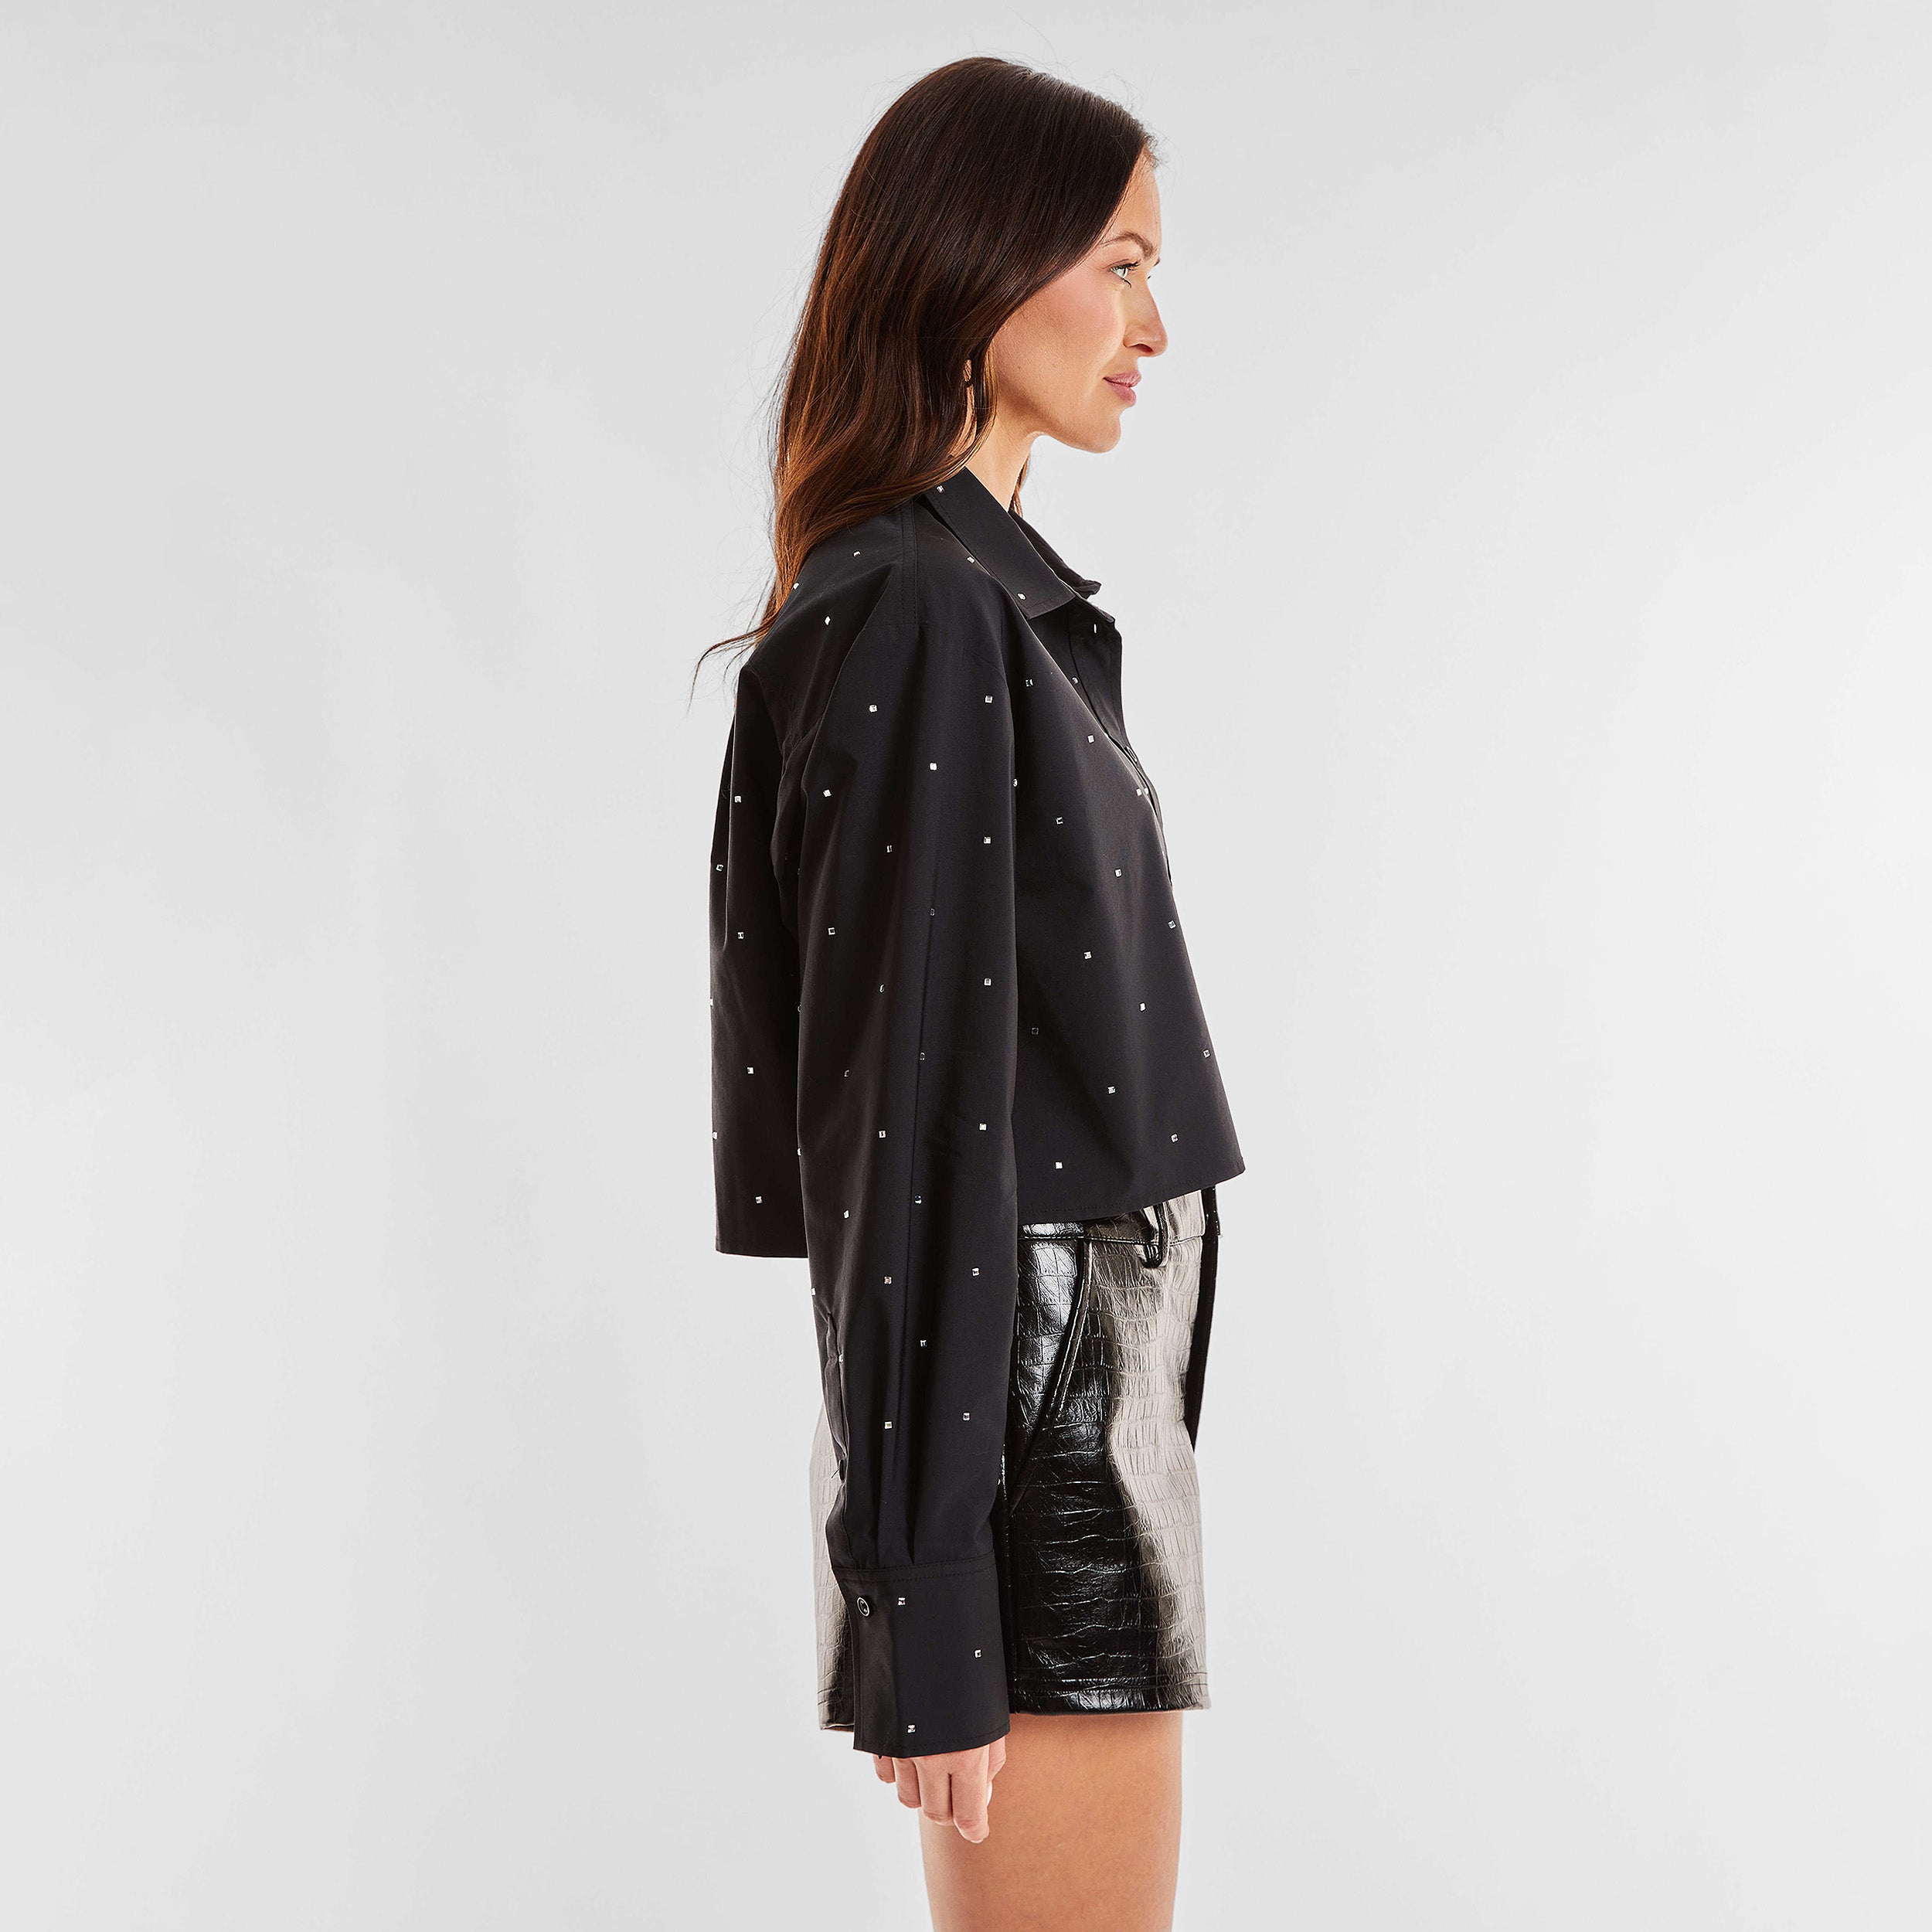 Side view of woman wearing a black cropped button down shirt with crystal embellishments and croco pattern embossed faux leather shorts.